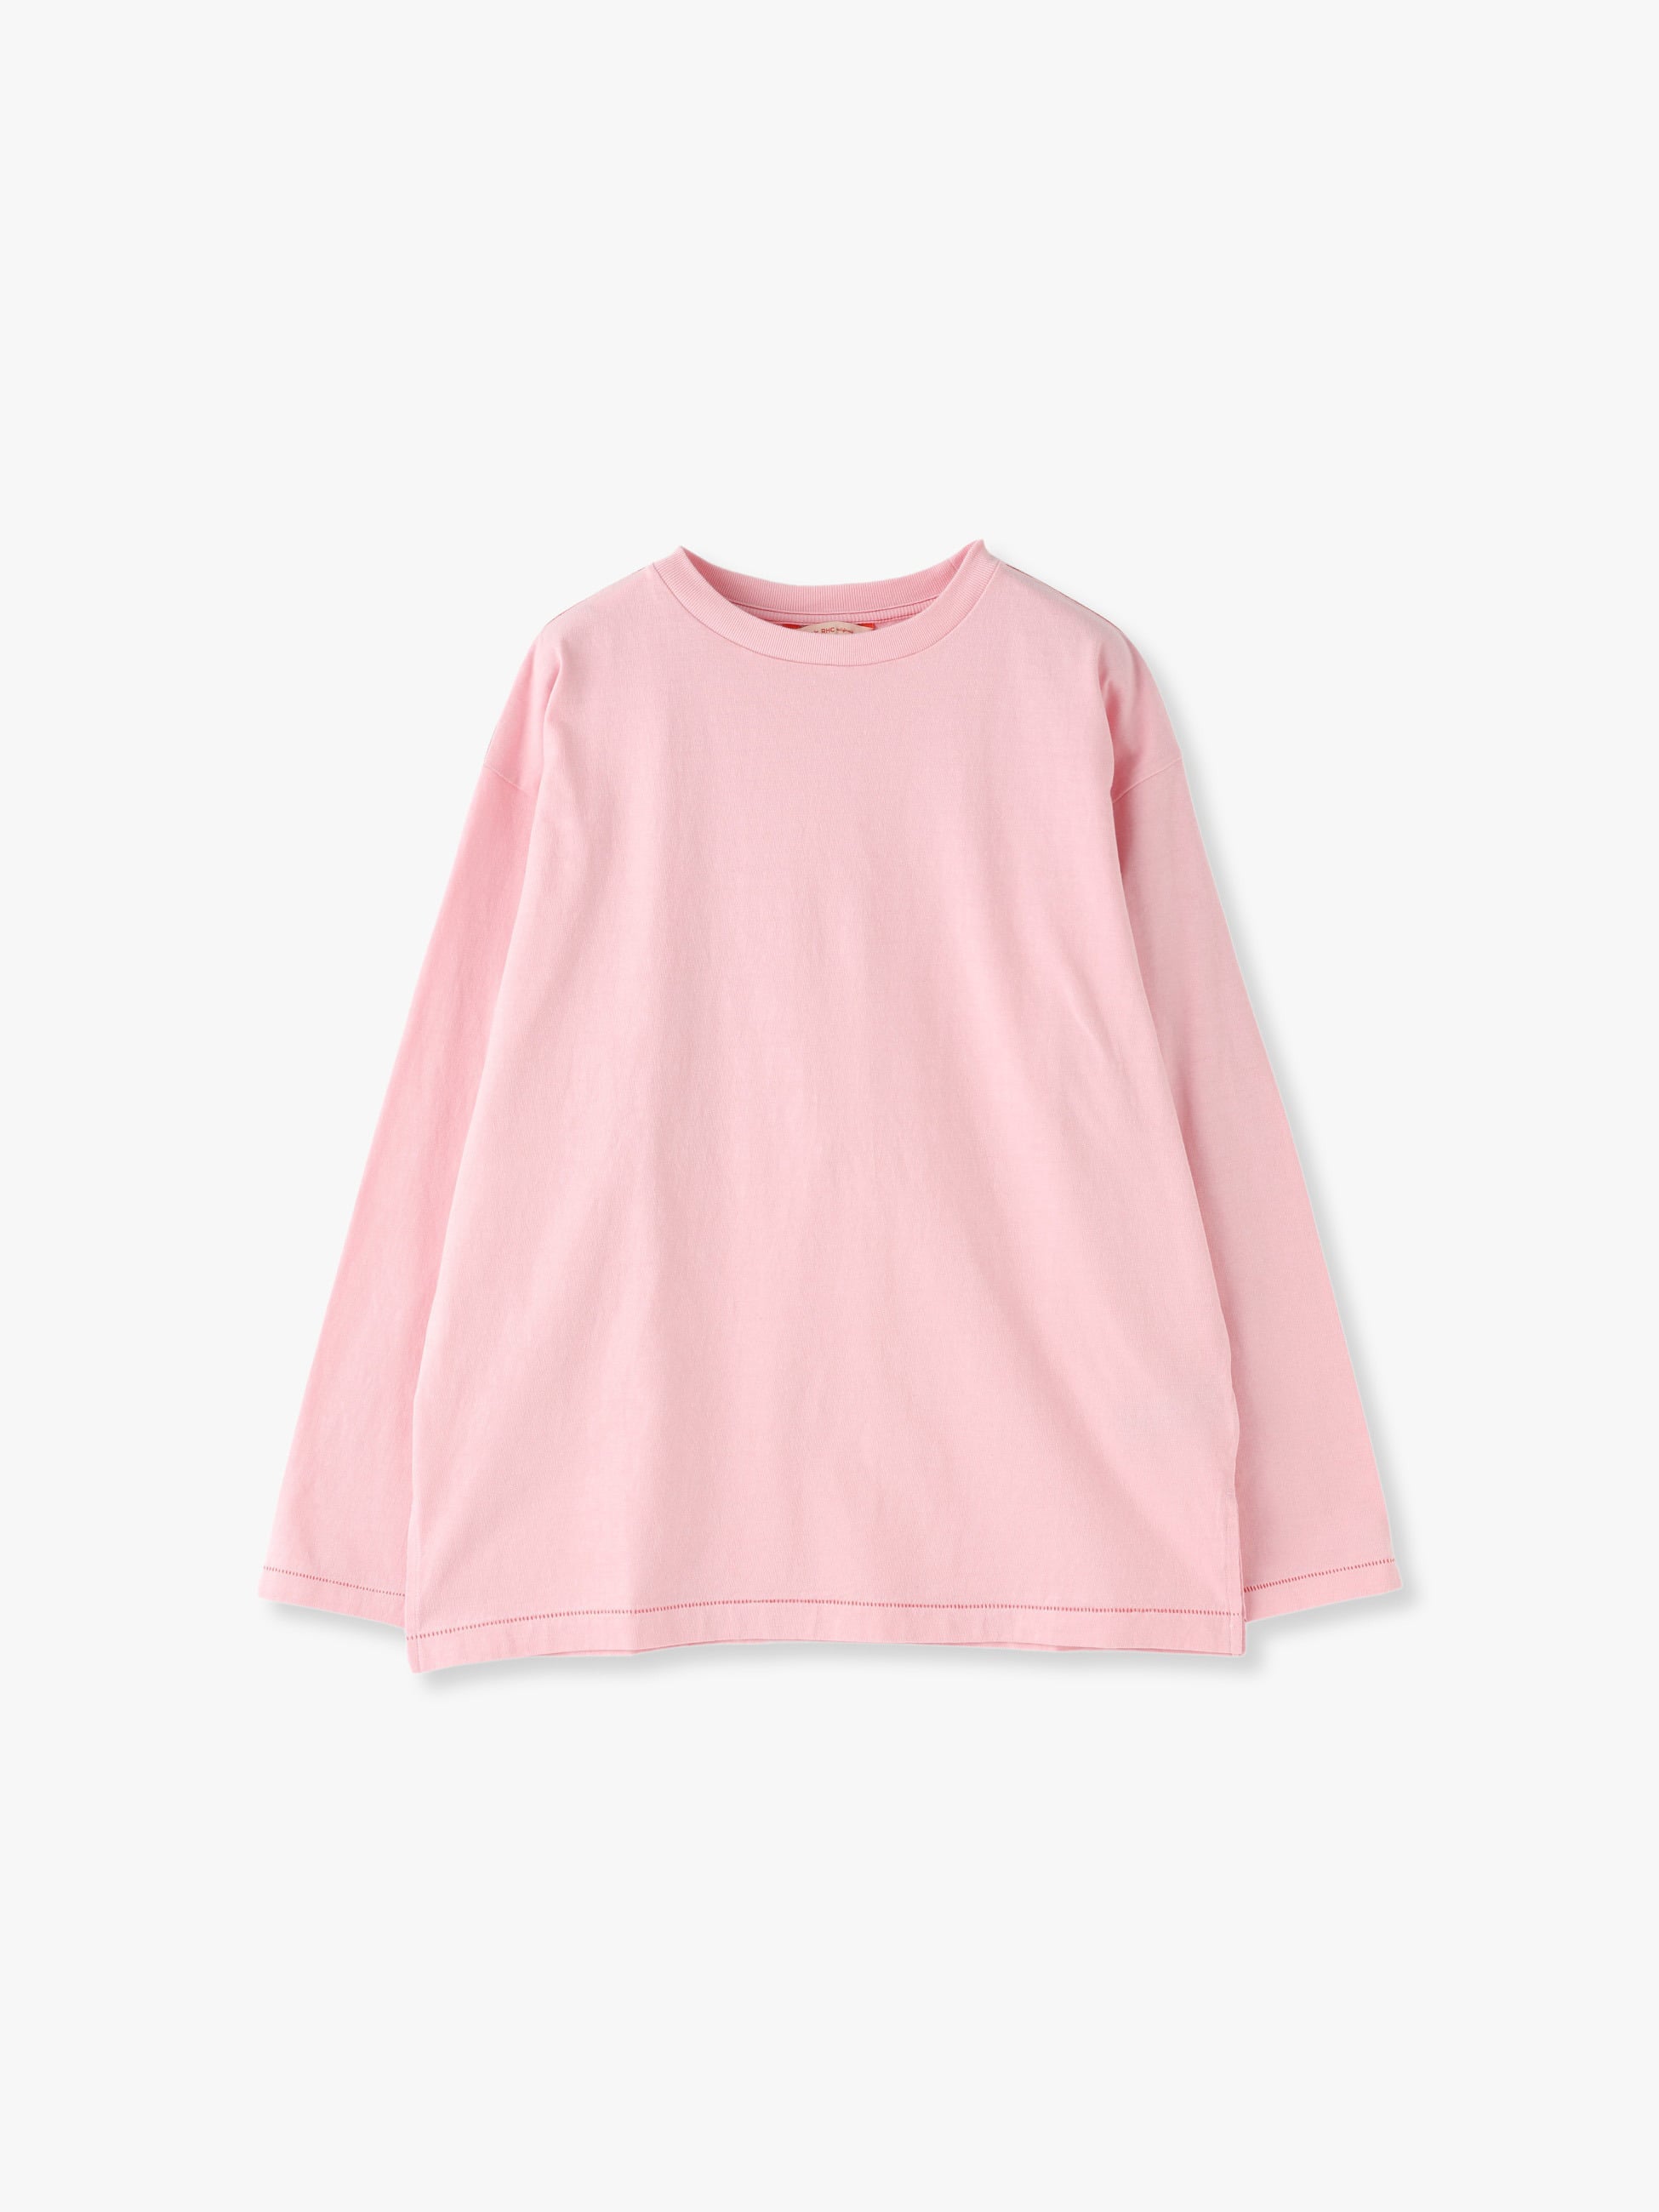 Ollier Long Sleeve Tee (white / pink / navy) 詳細画像 pink 5